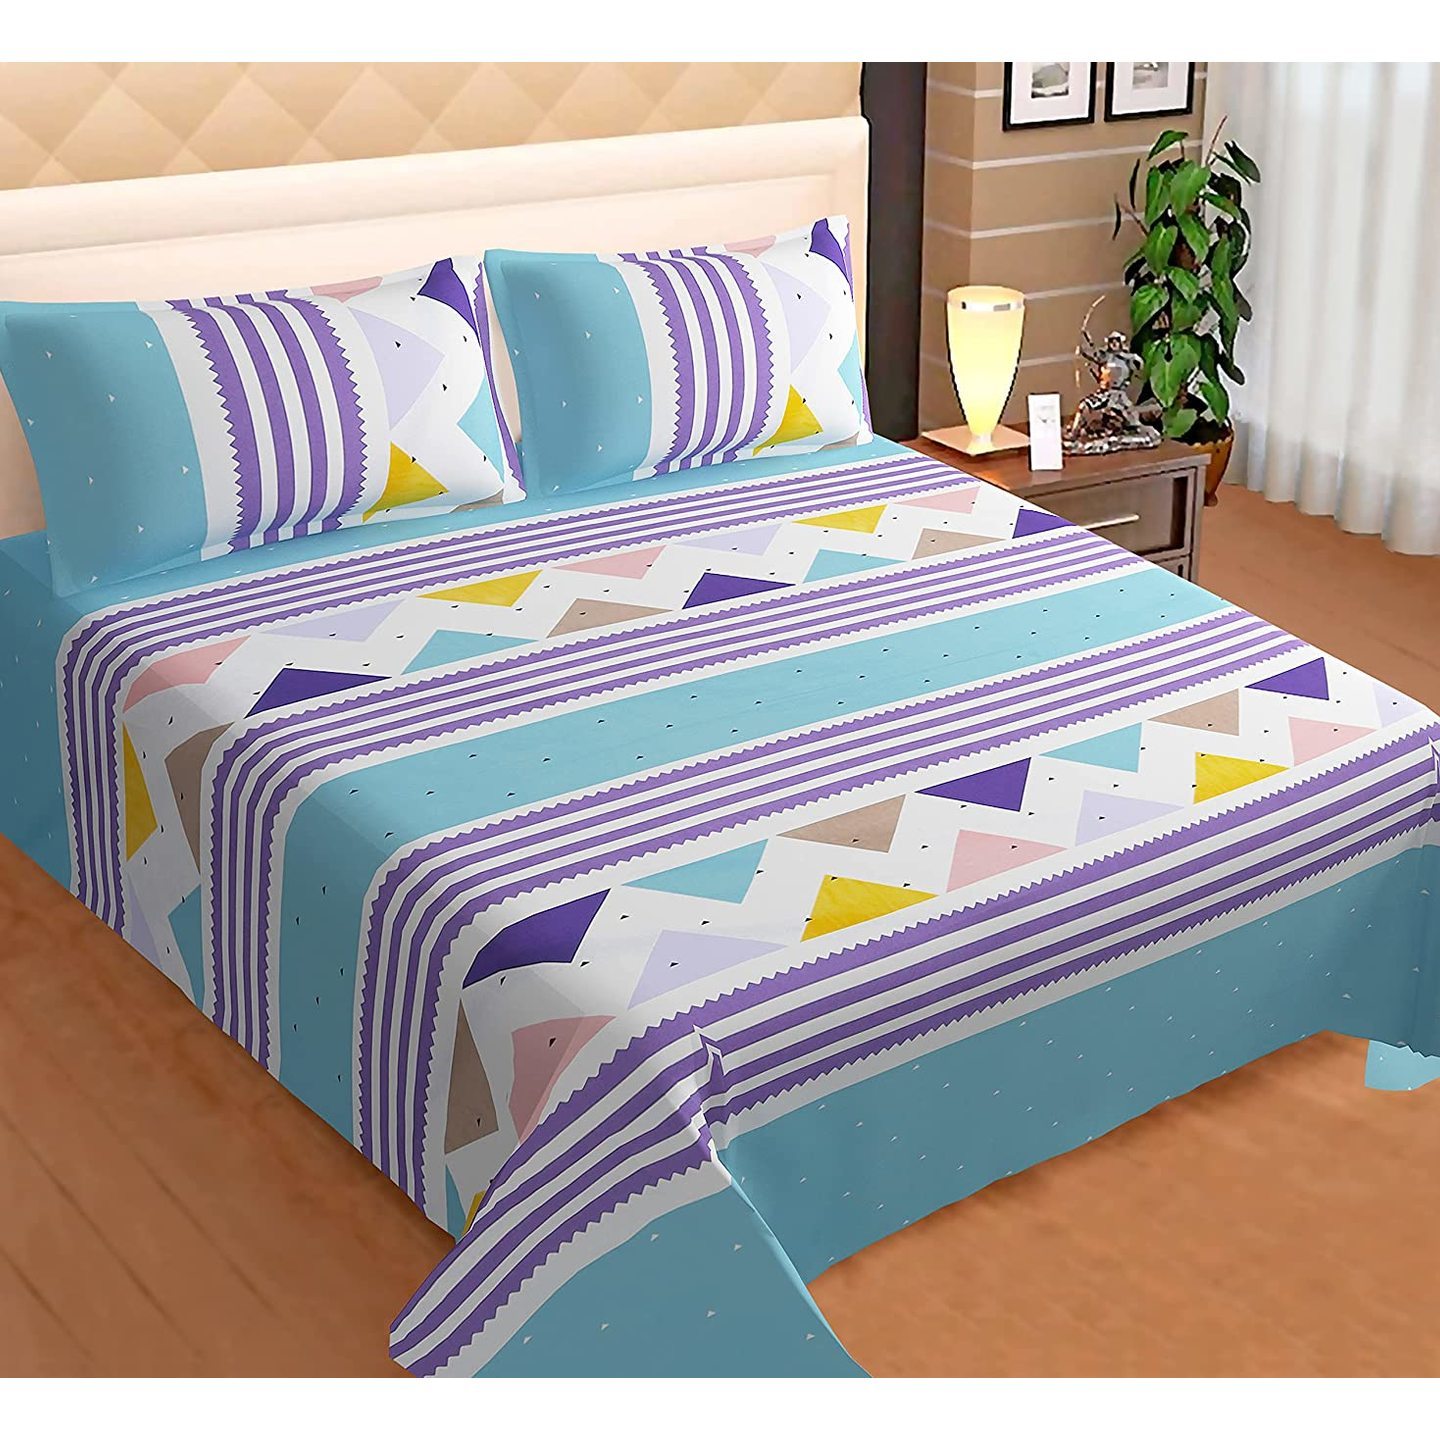 Handtex Home 300TC Cotton Printed Double Bedsheet 2 Pillow Cover Size (90 x 100 inch / 17 x 27 inch) 